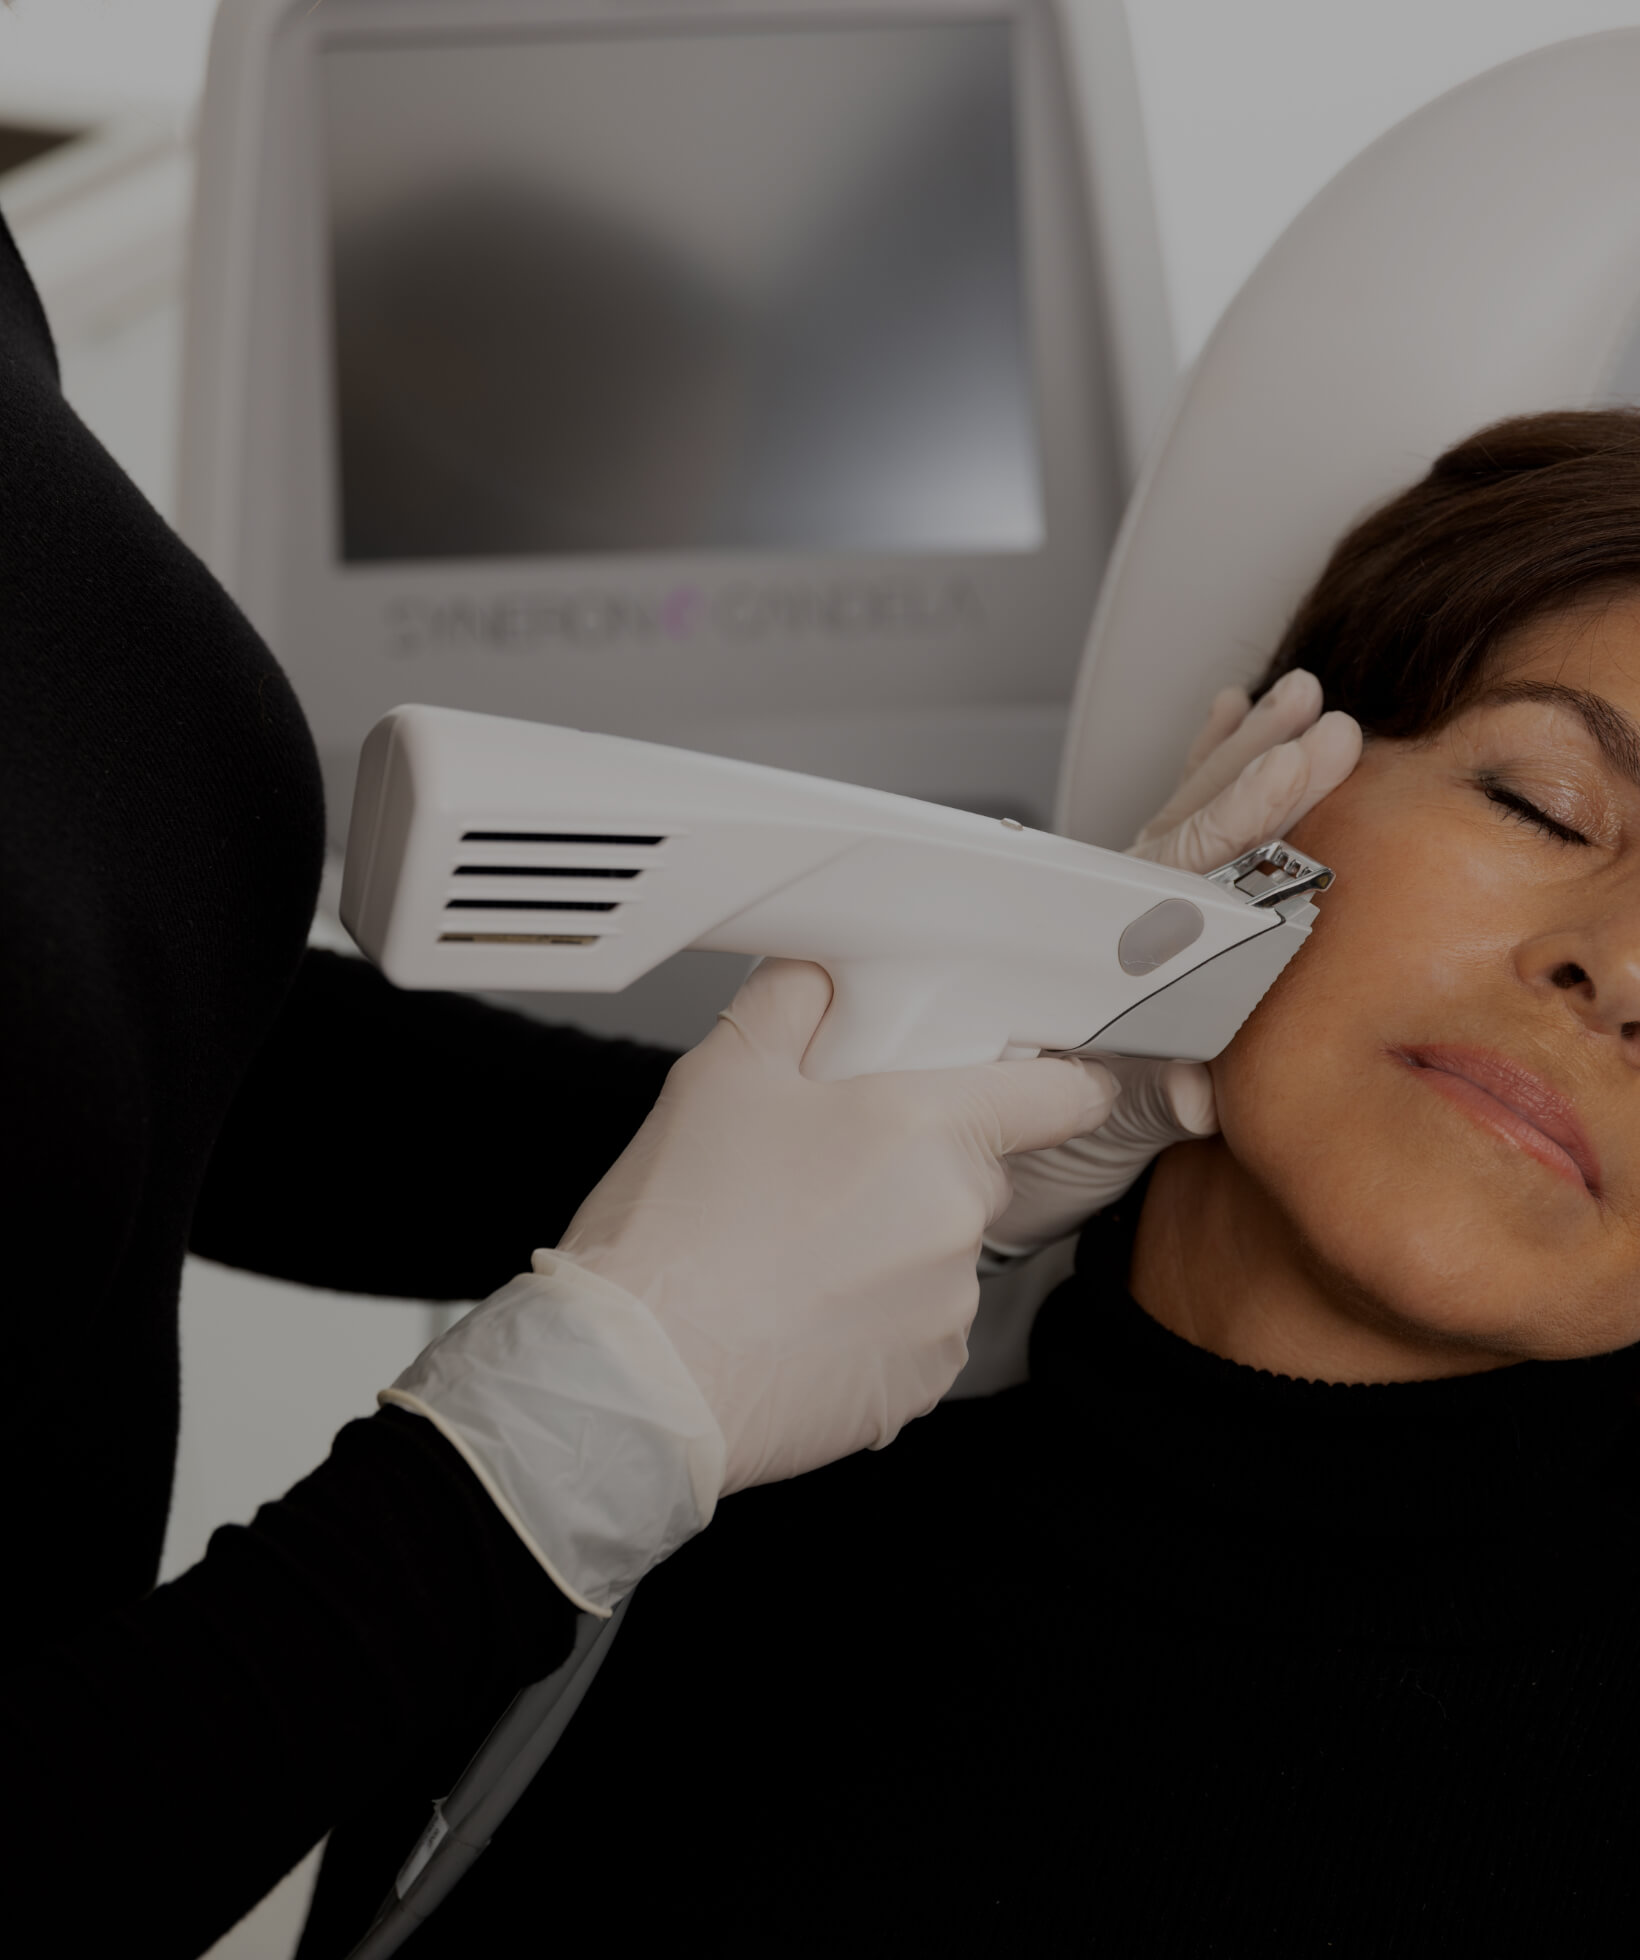 A nurse at Clinique Chloé treating a patient's face with the Profound radiofrequency microneedling device